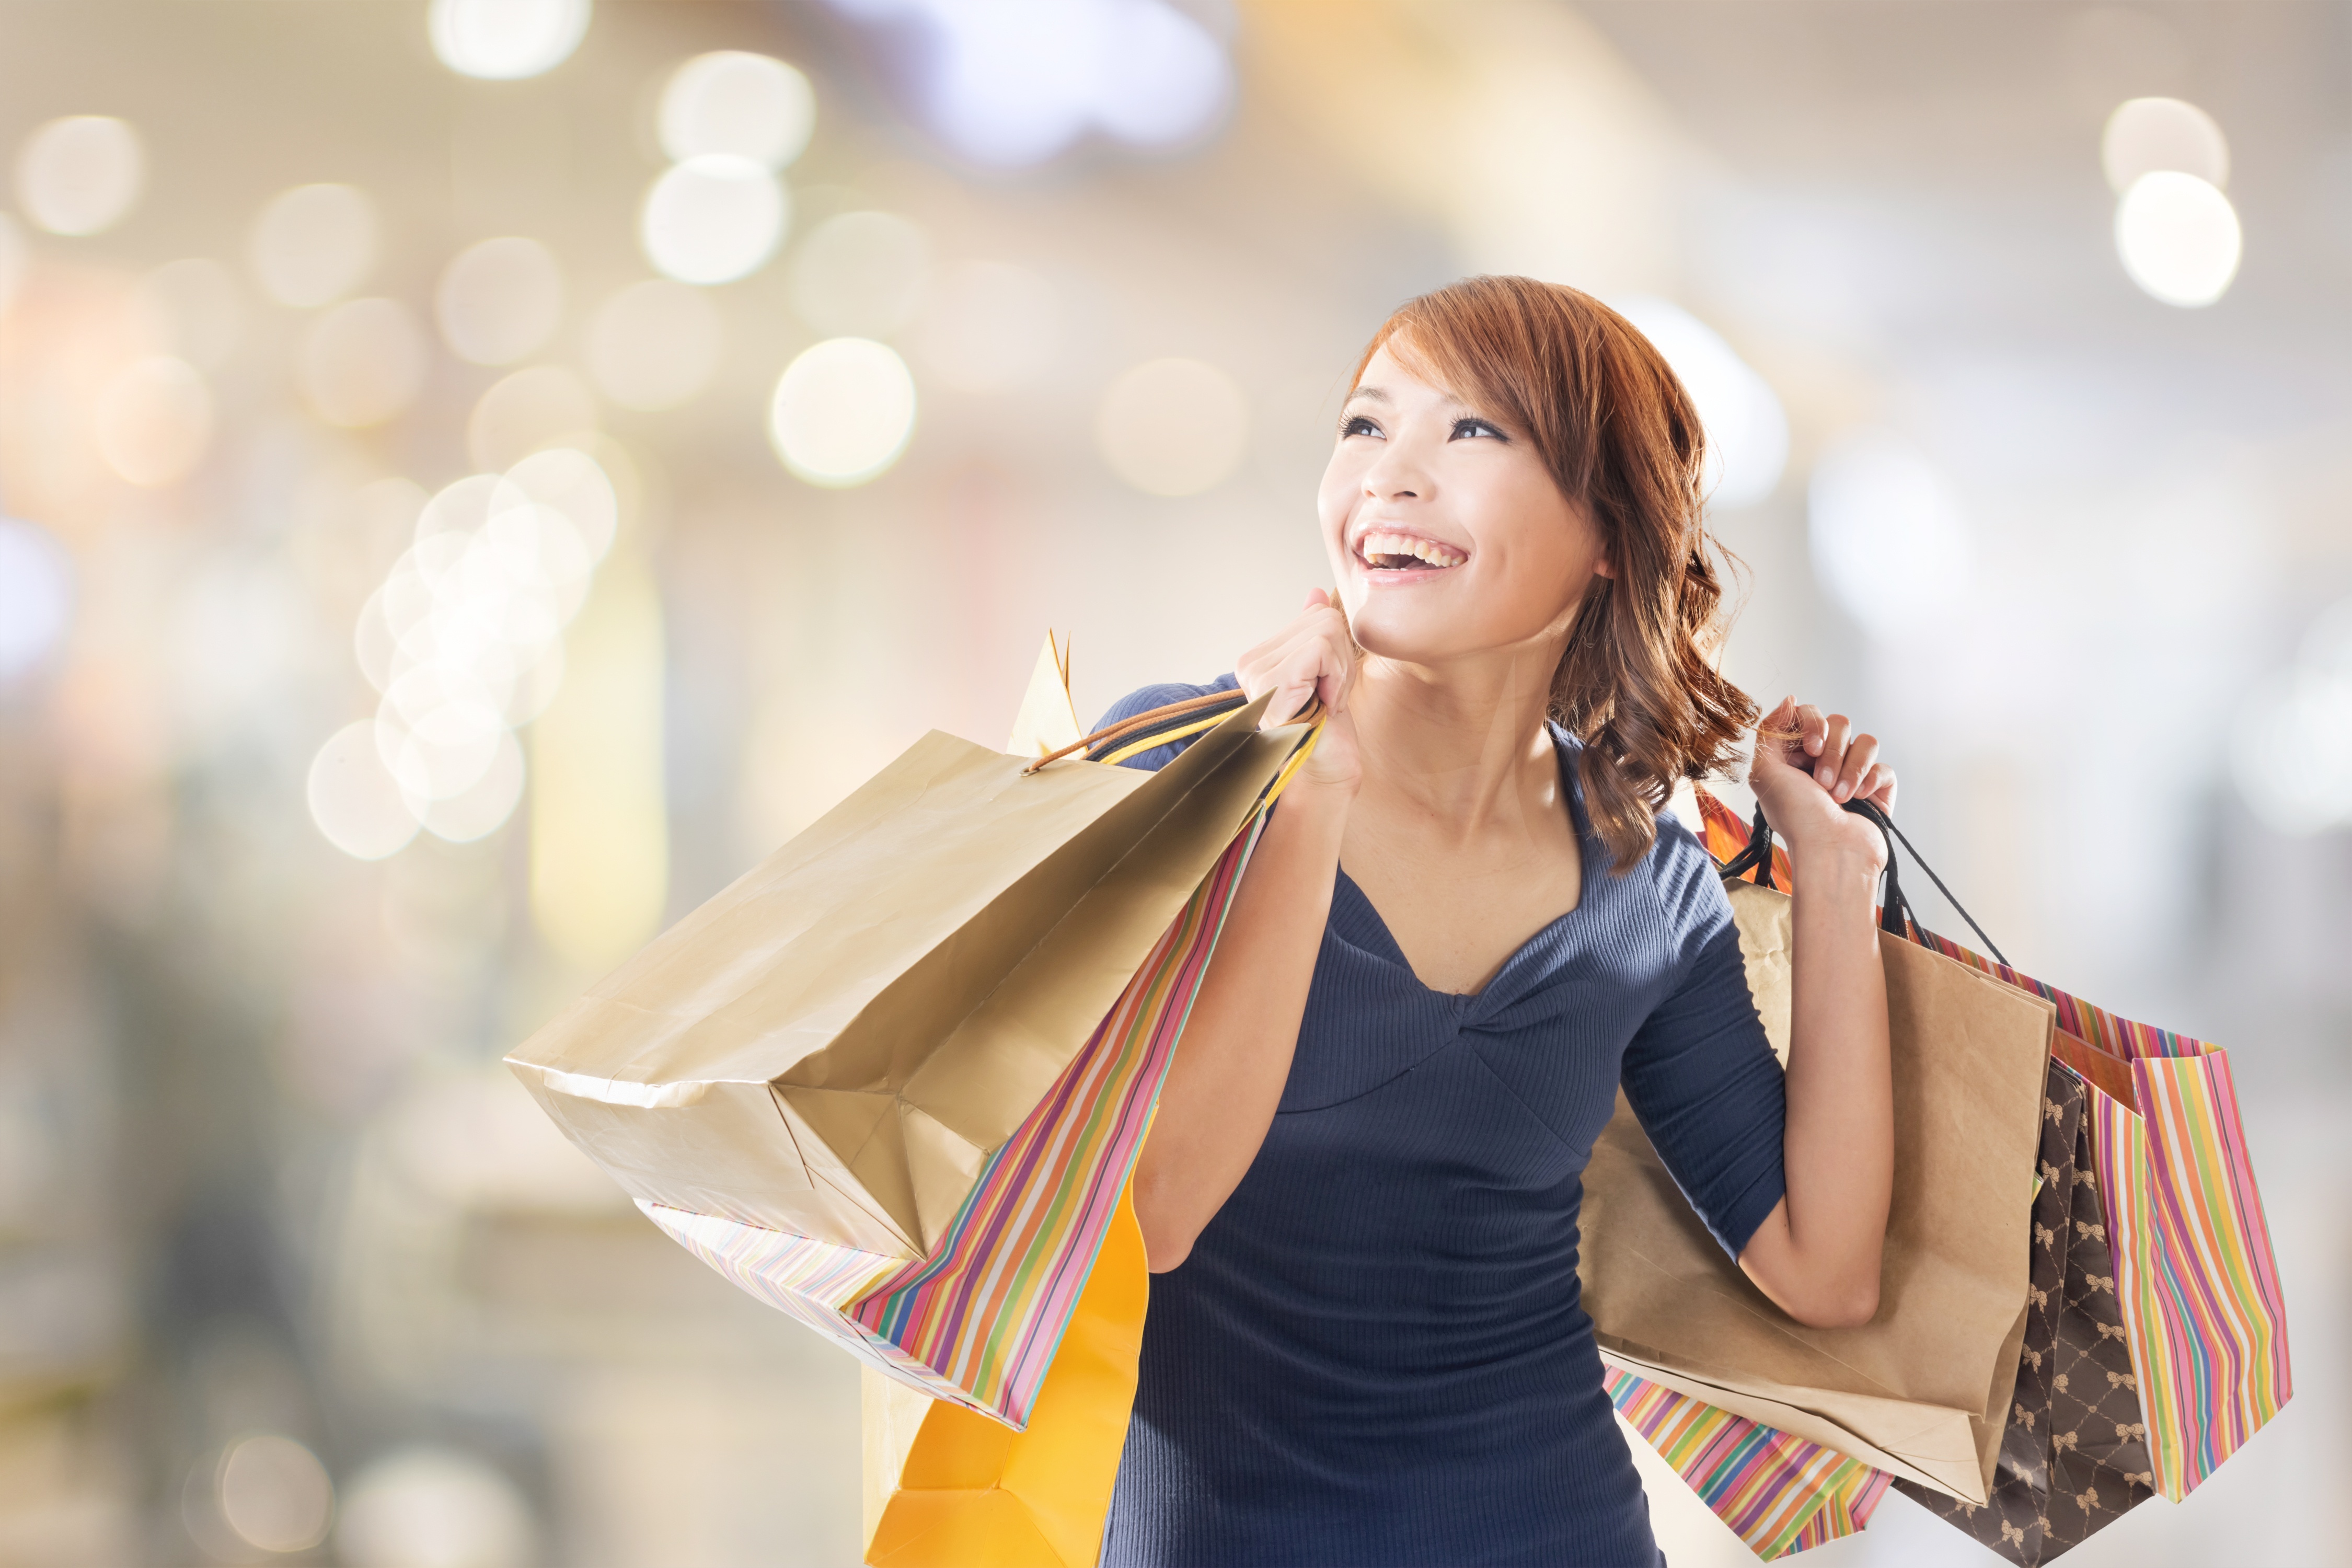 Declining prices in China may be good news for shoppers, but it's unwelcome news for retailers. Photo: Shutterstock